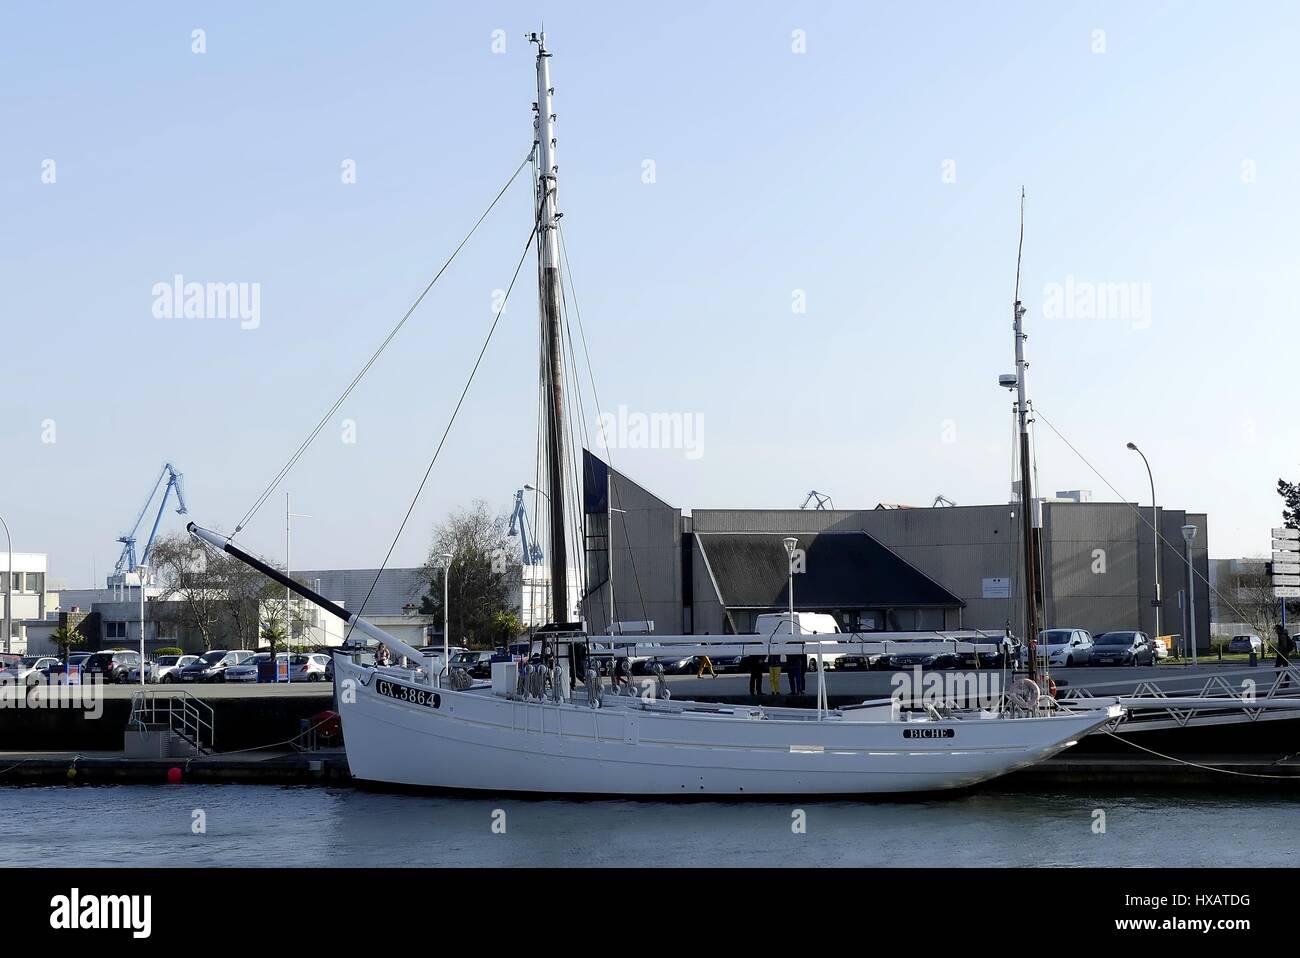 Lorient, France - March 25, 2017: Old wooden Tuna sailing boat docked in the harbor of Lorient, France. Stock Photo